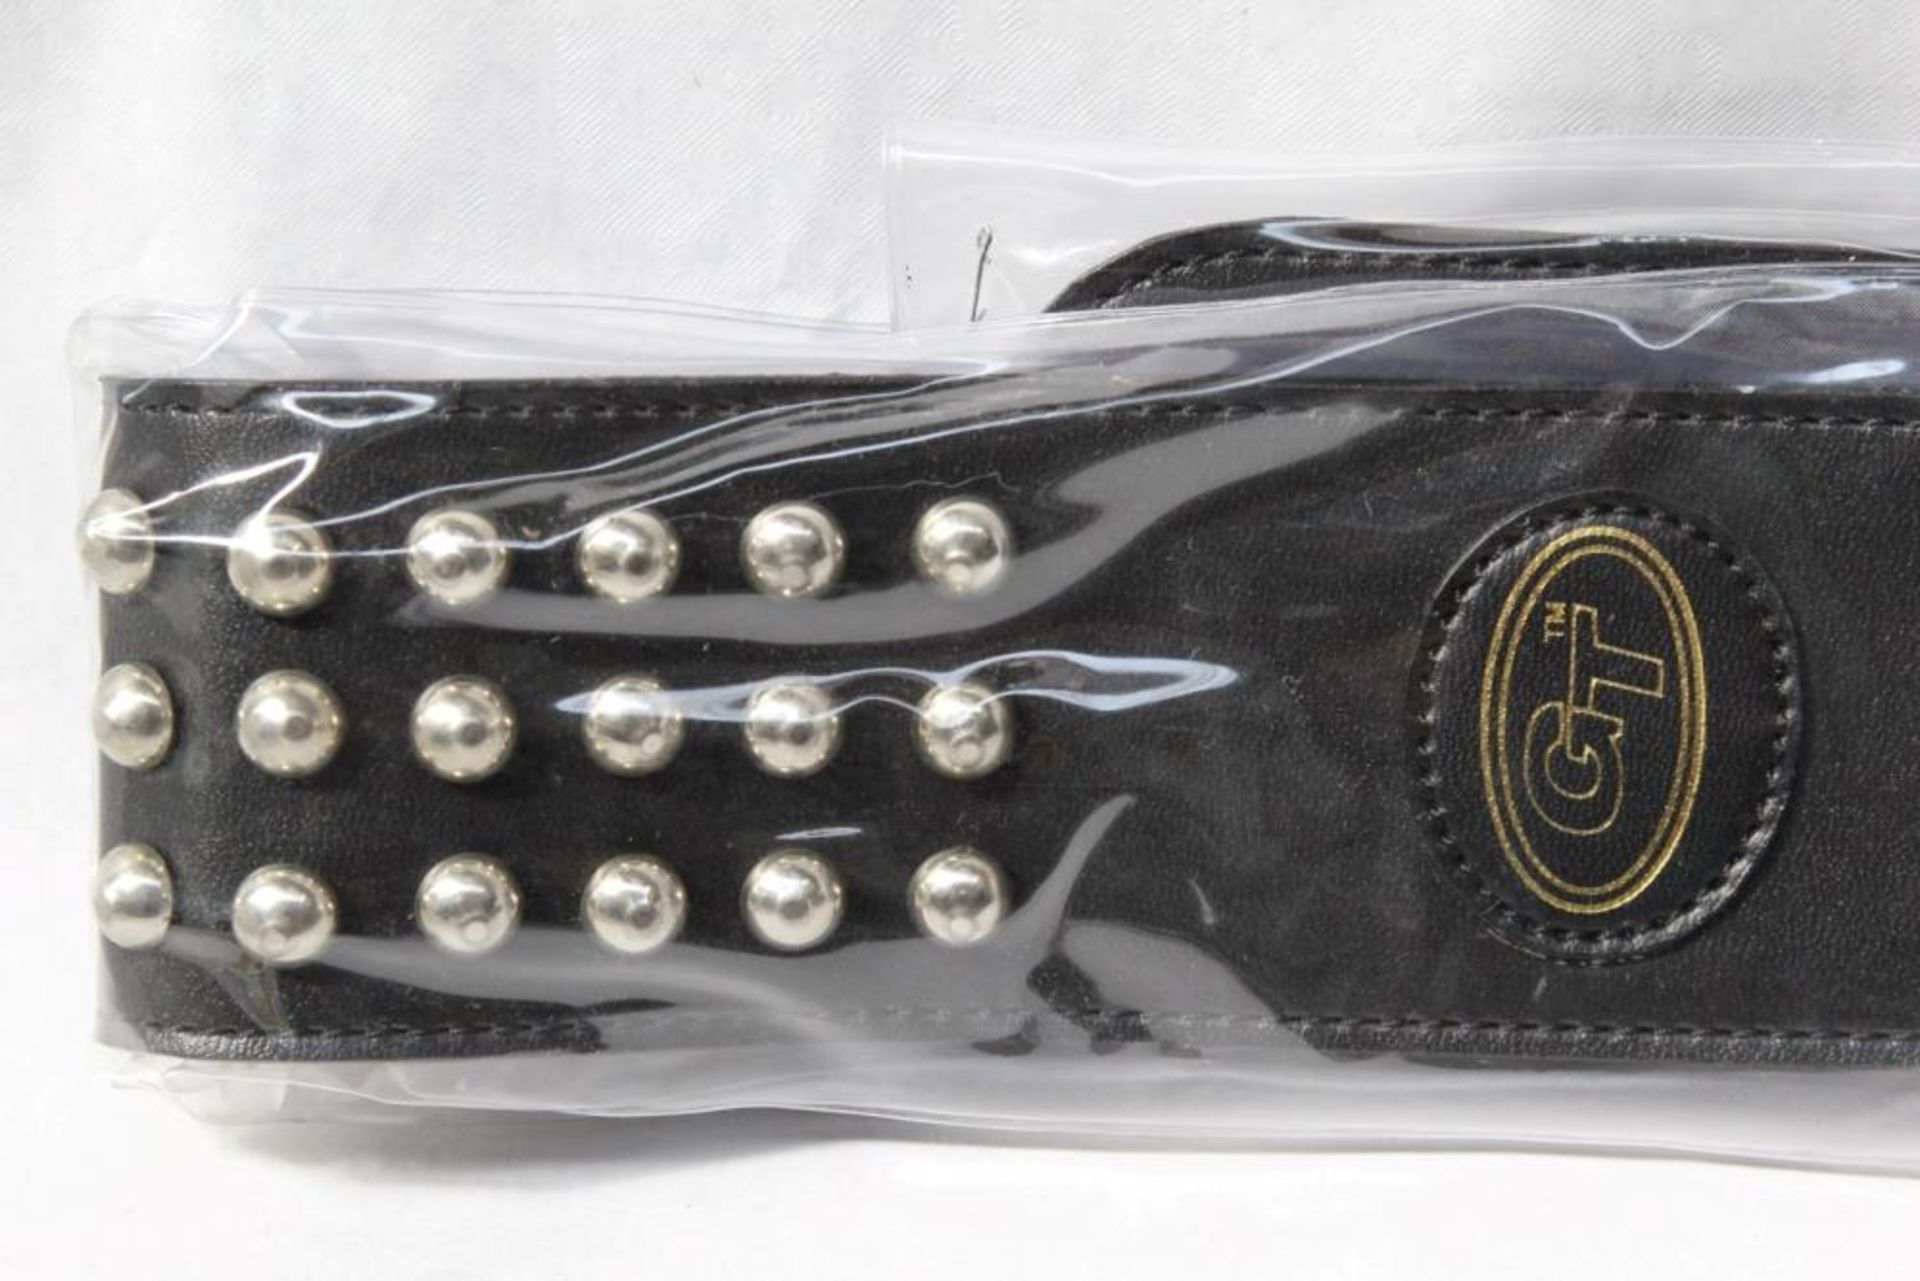 1 x Guitar Tech Leather Studded Guitar Strap - New in Packet - CL020 - Ref Pro173 - Location: - Image 3 of 3